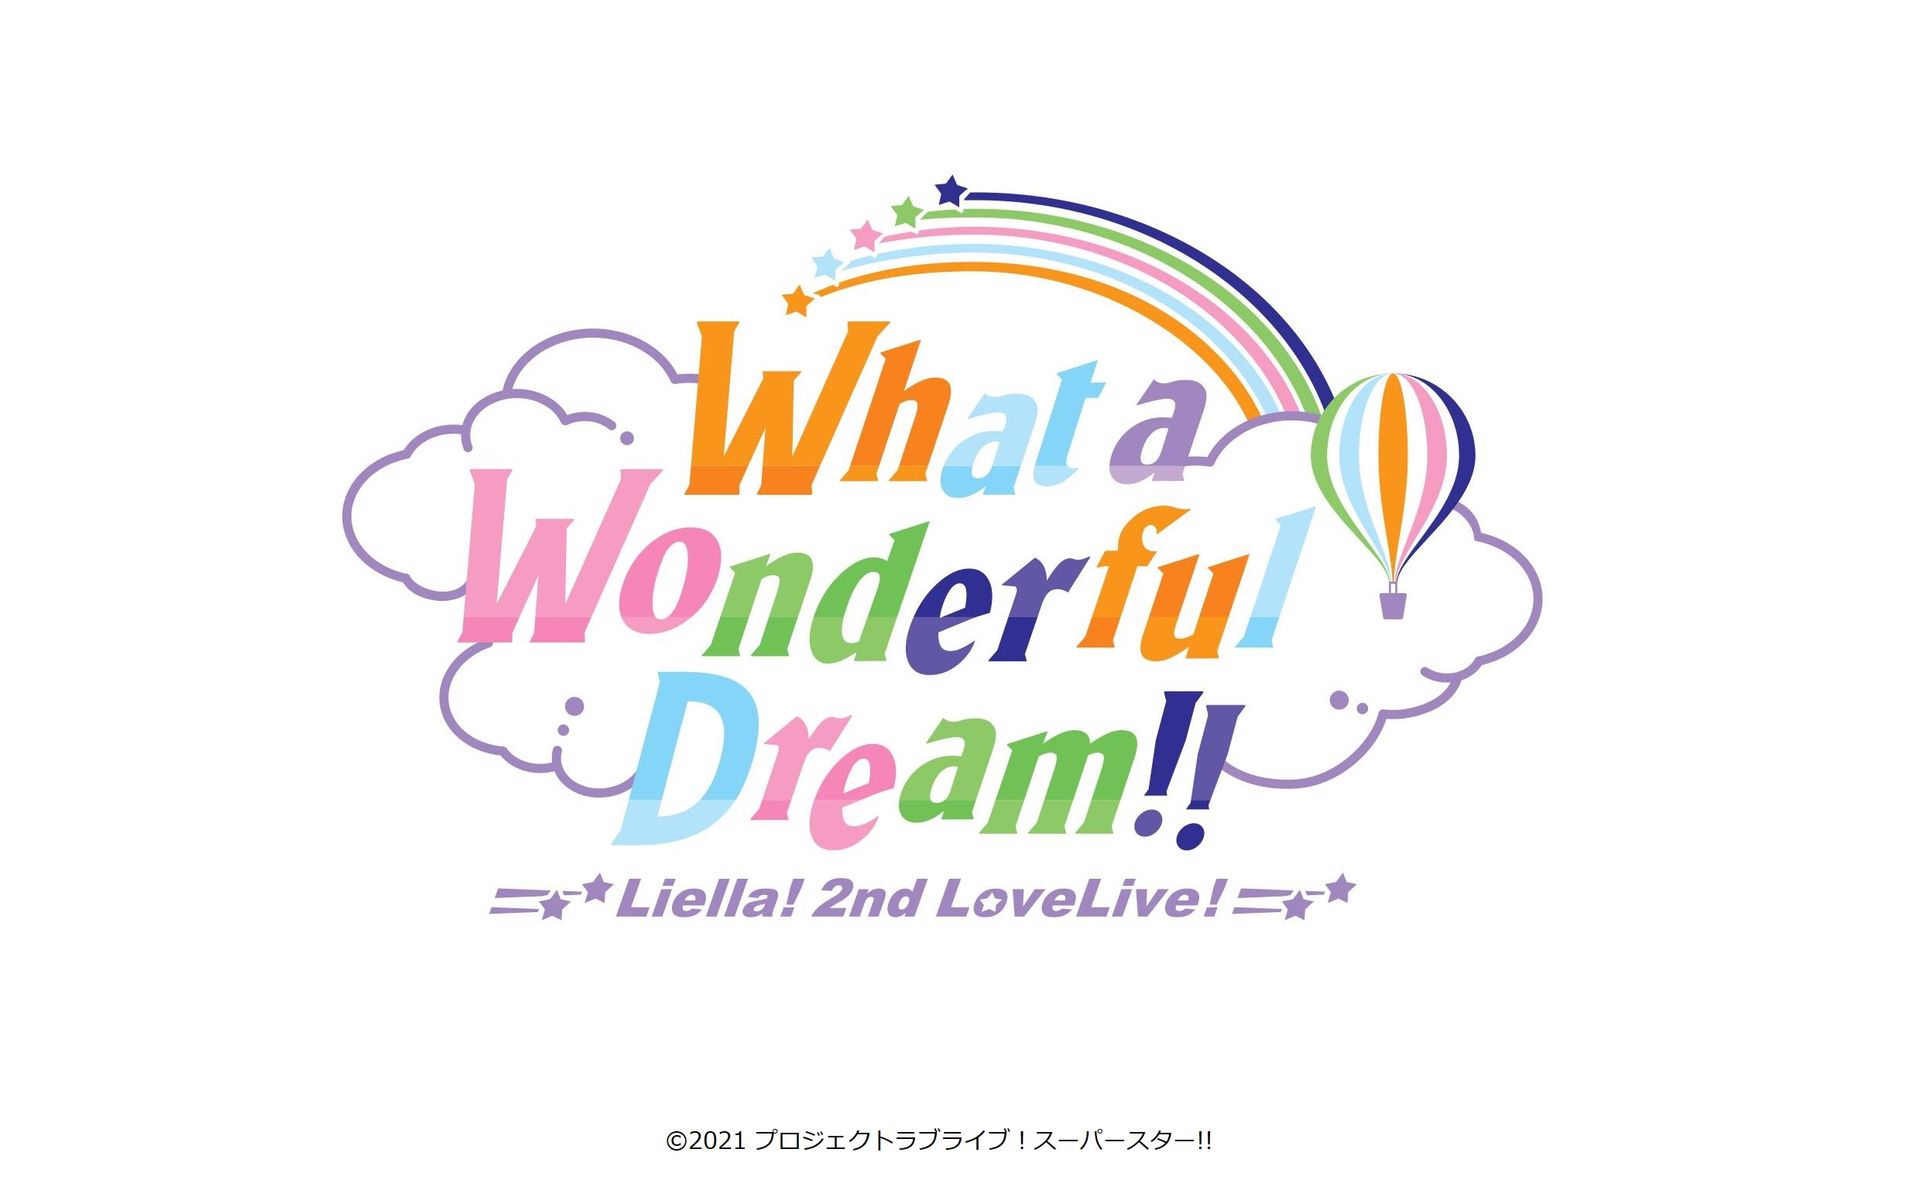 [Streaming+] Love Live! Superstar!! Liella! 2nd LoveLive! ～What a Wonderful Dream!!～with Yuigaoka Girls Band